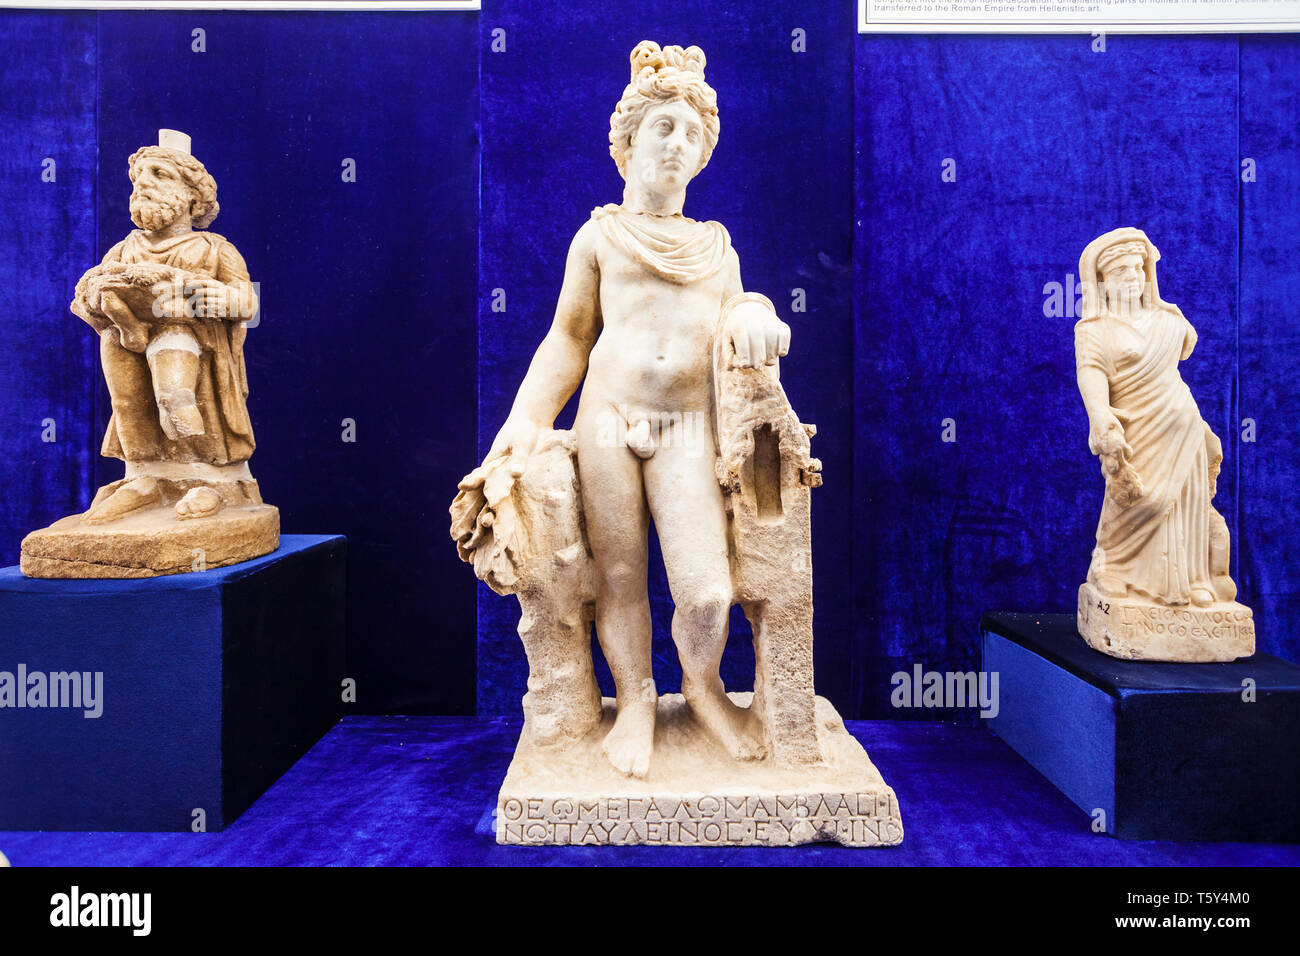 ANTALYA, TURKEY - SEPTEMBER 14, 2014: Antalya Archeological Museum is one of Turkey's largest museums located in Antalya city in Turkey Stock Photo